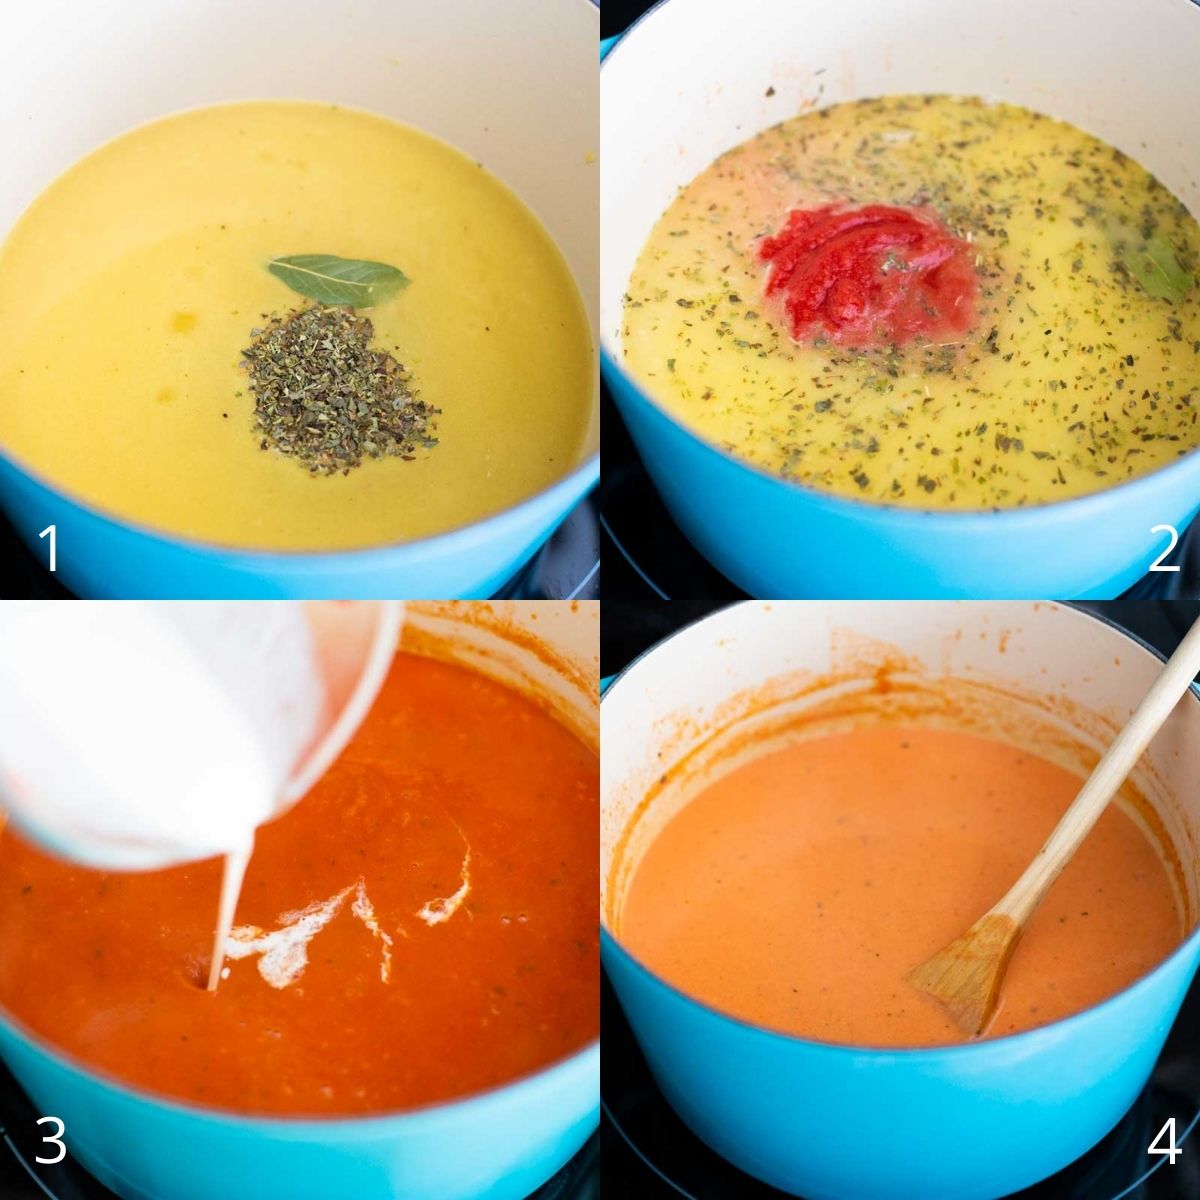 Step by step photos show how to add the chicken stock, basil and Italian herbs, and tomatoes to finish the soup.